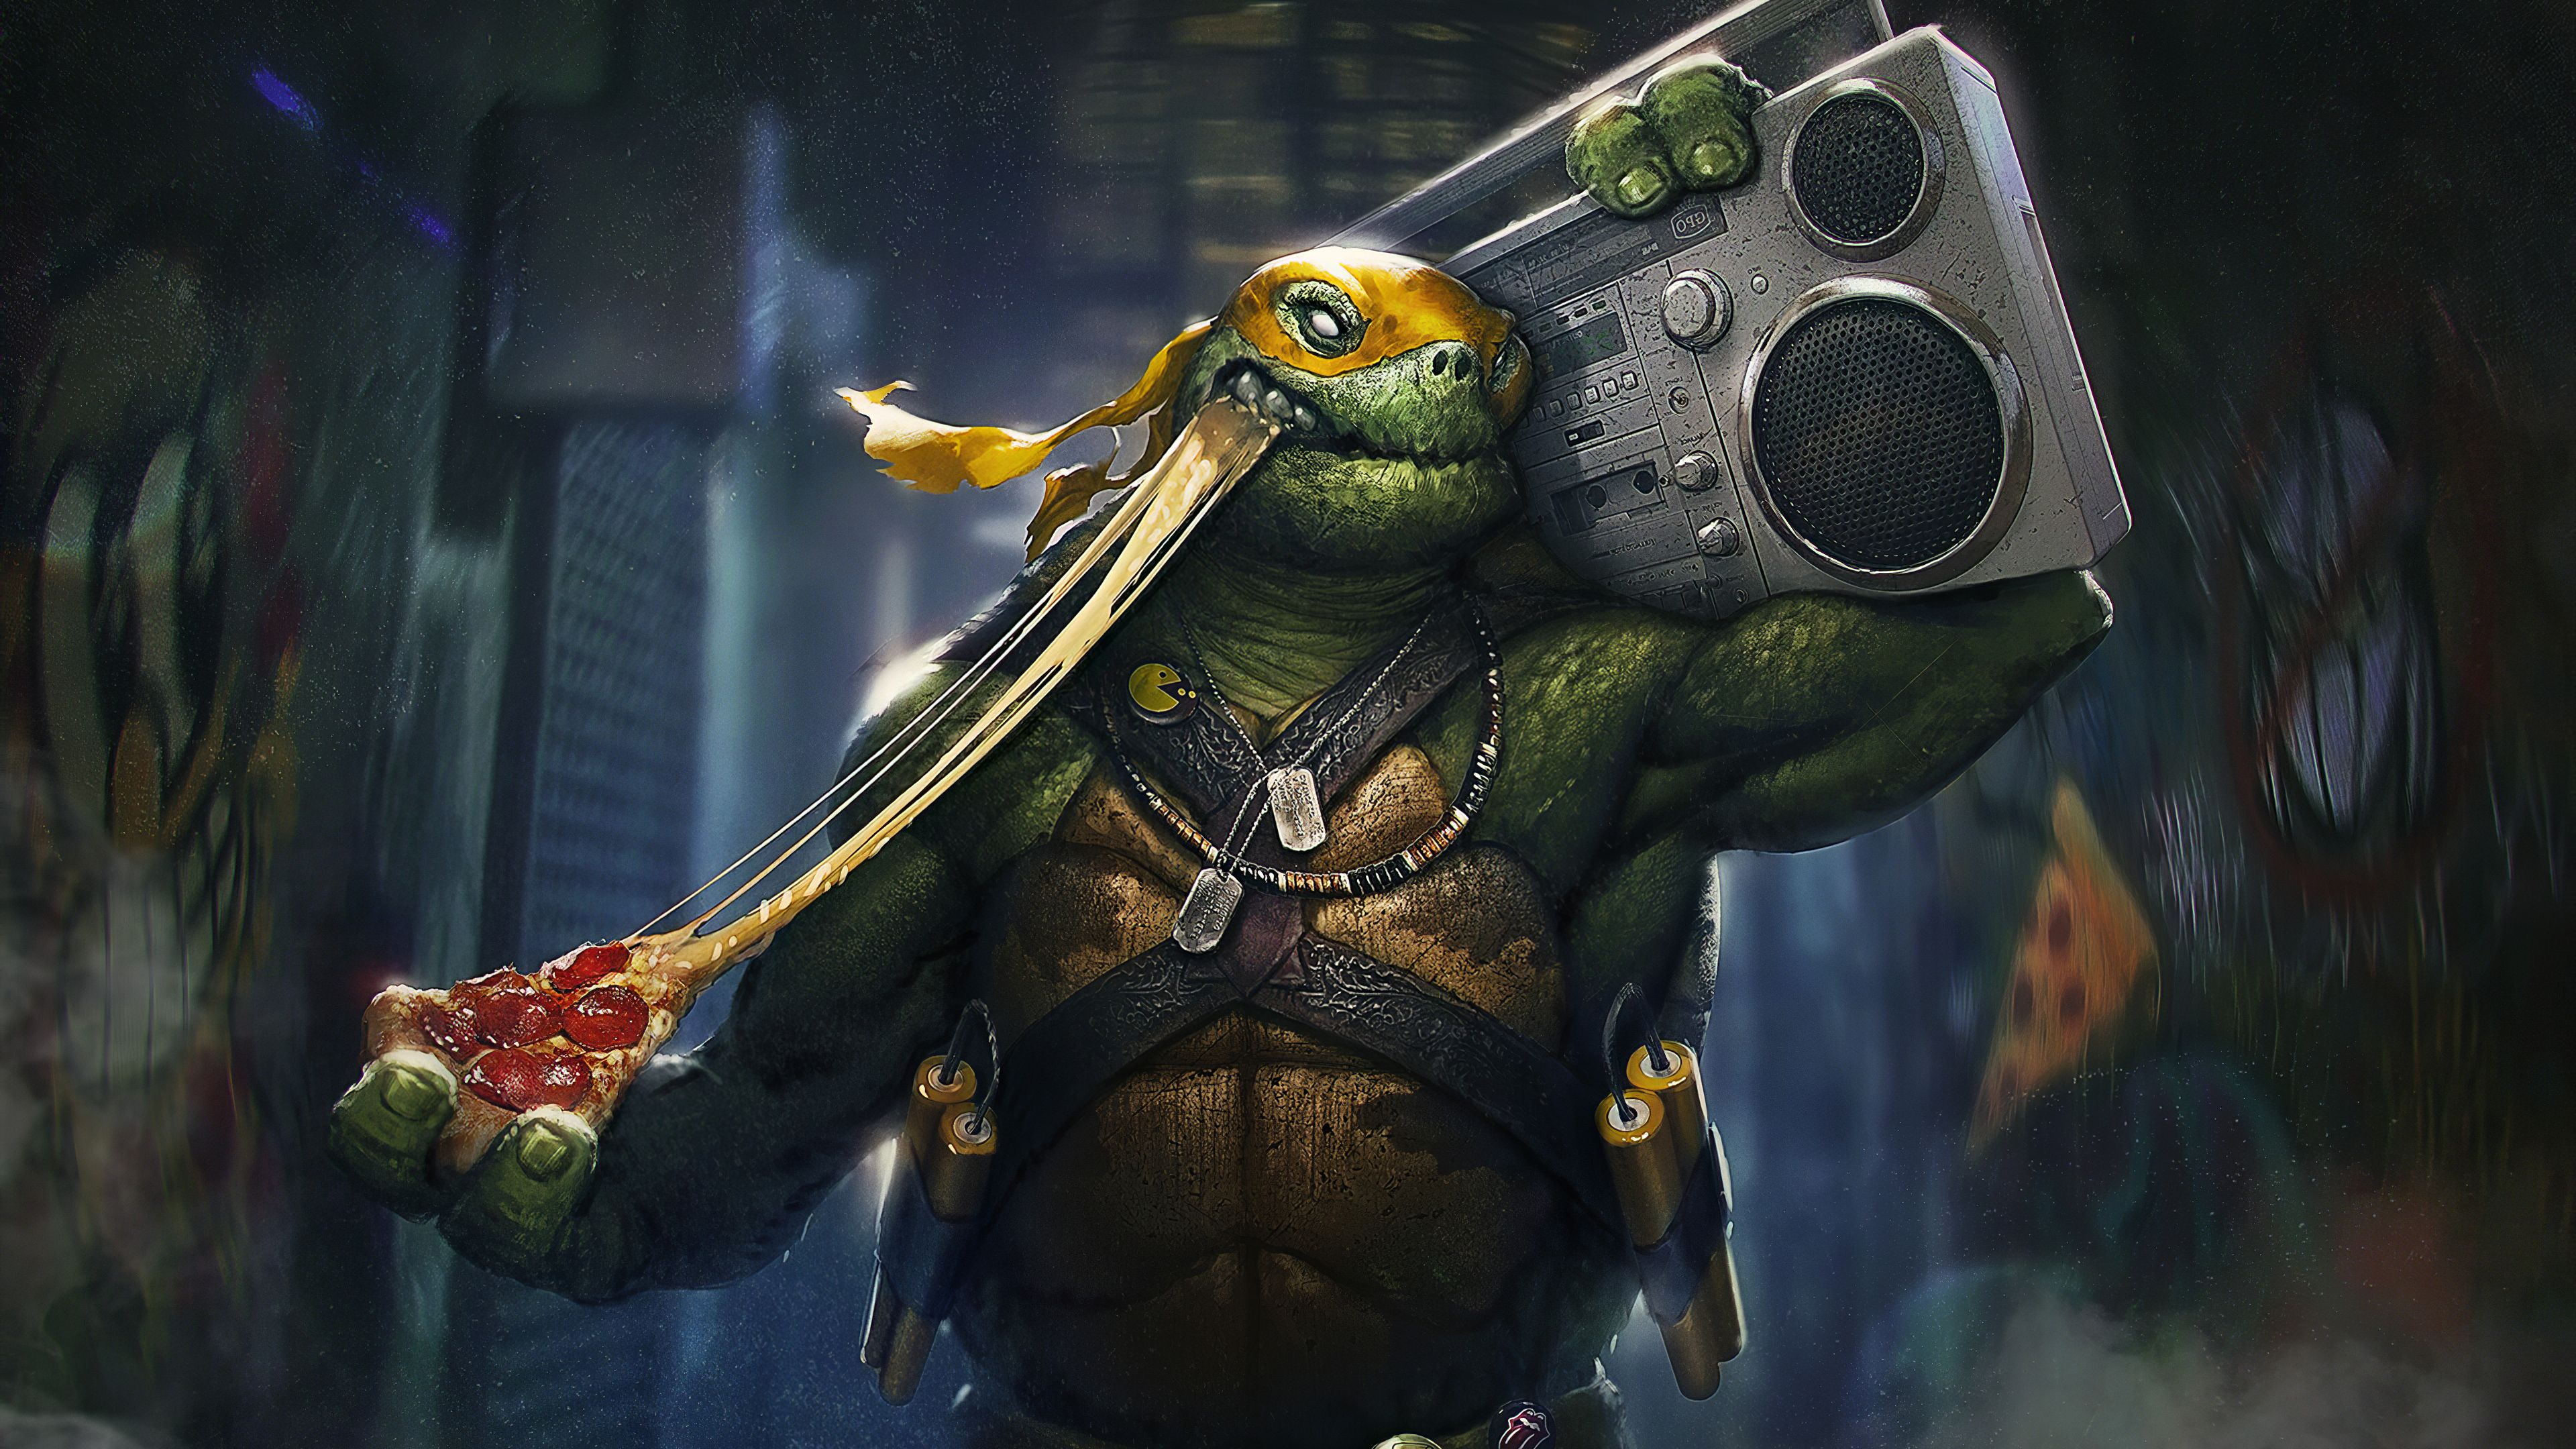 TMNT Mikey 4k, HD Superheroes, 4k Wallpaper, Image, Background, Photo and Picture